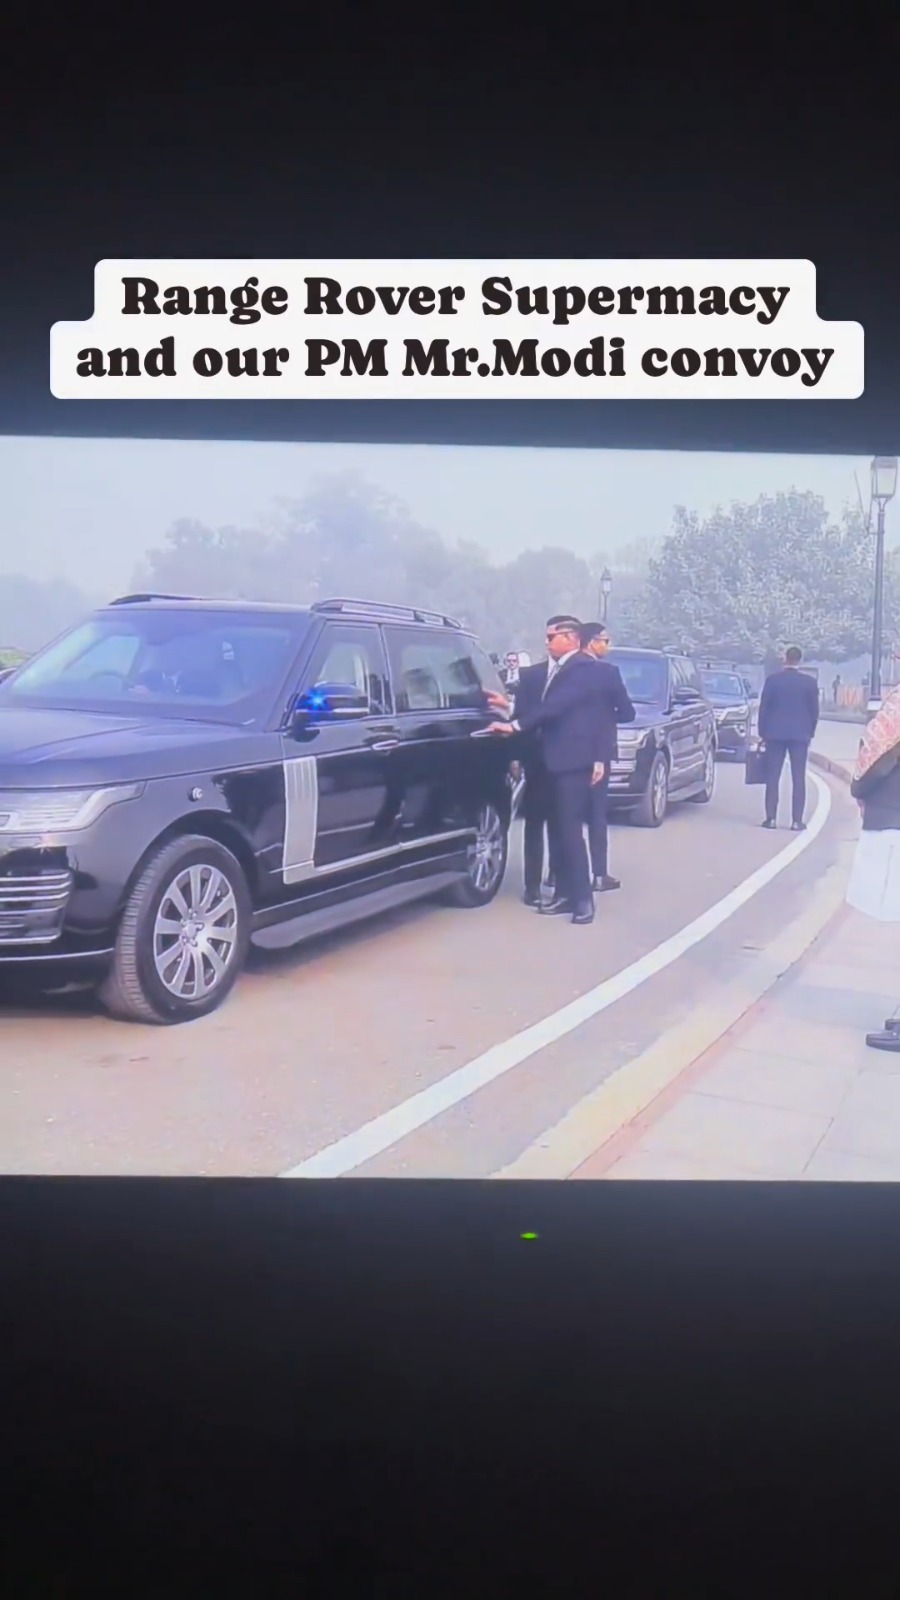 Range Rover Supermacy with Our PM Mr Modi Convoy